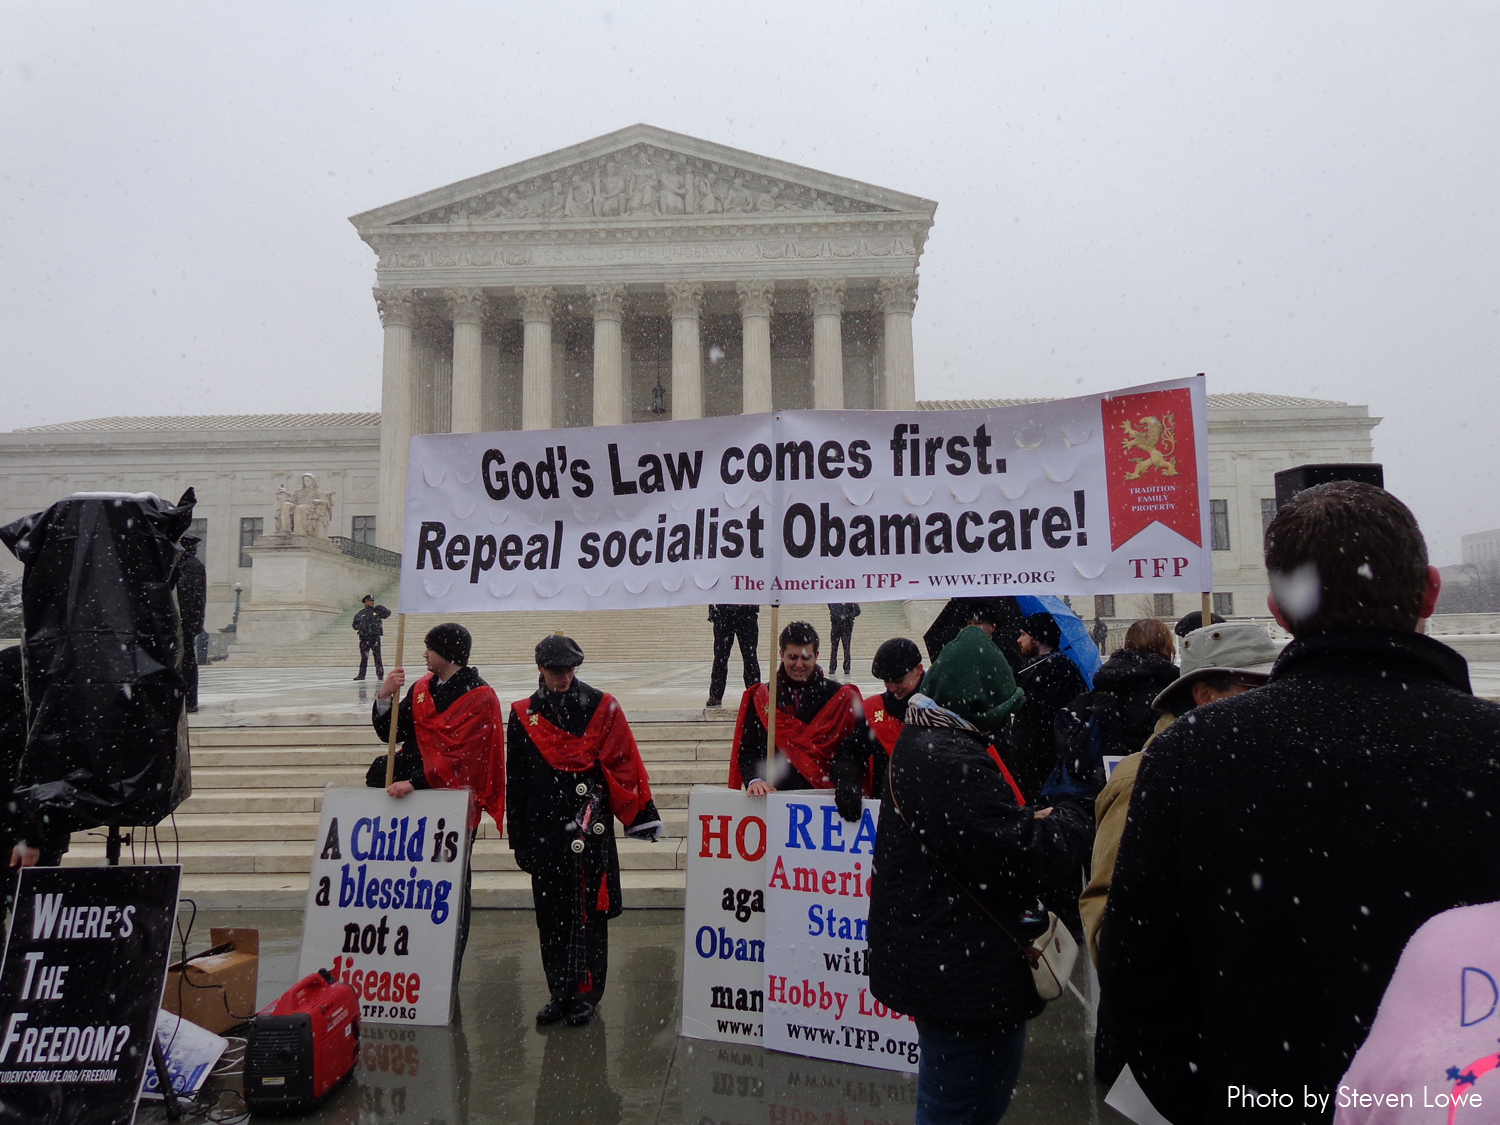 3/25/2014 - Rally at the US Supreme Court during Sebelius v. Hobby Lobby